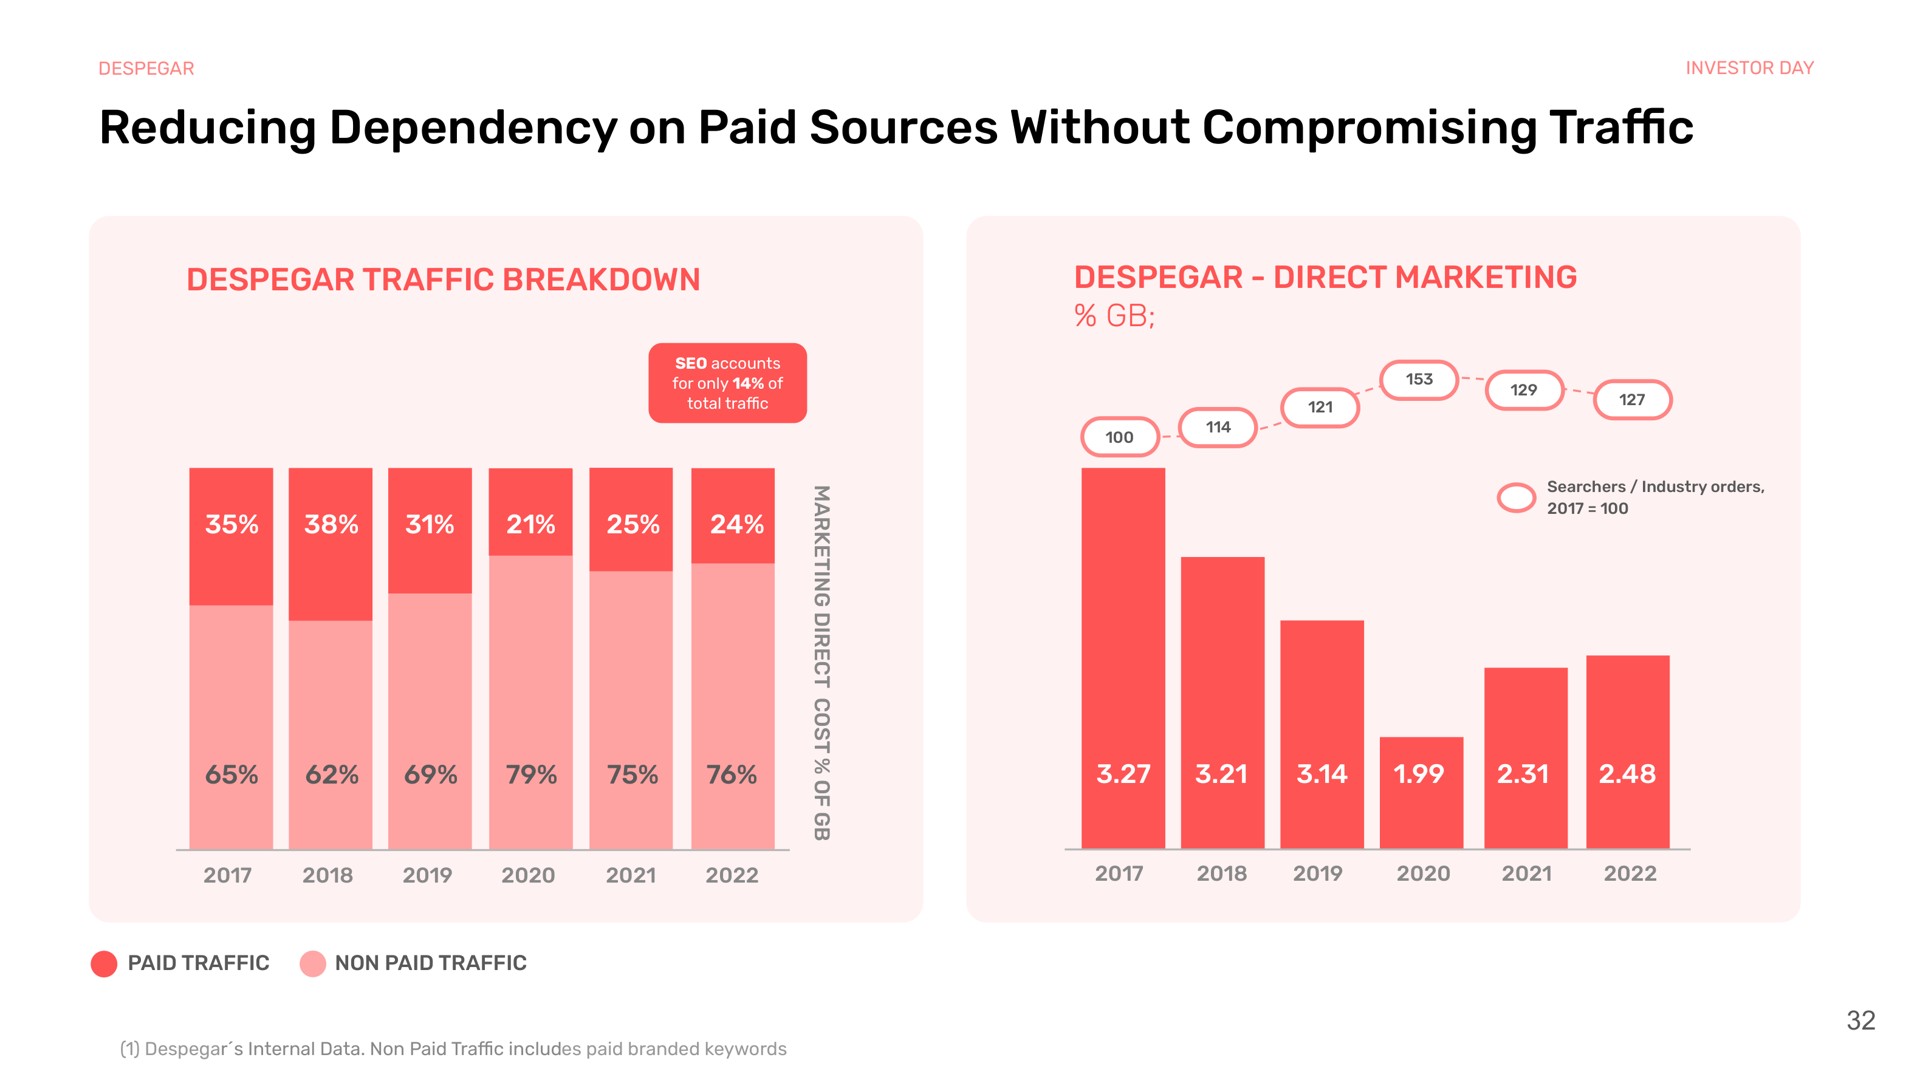 reducing dependency on paid sources without compromising traffic traffic breakdown direct marketing | Despegar